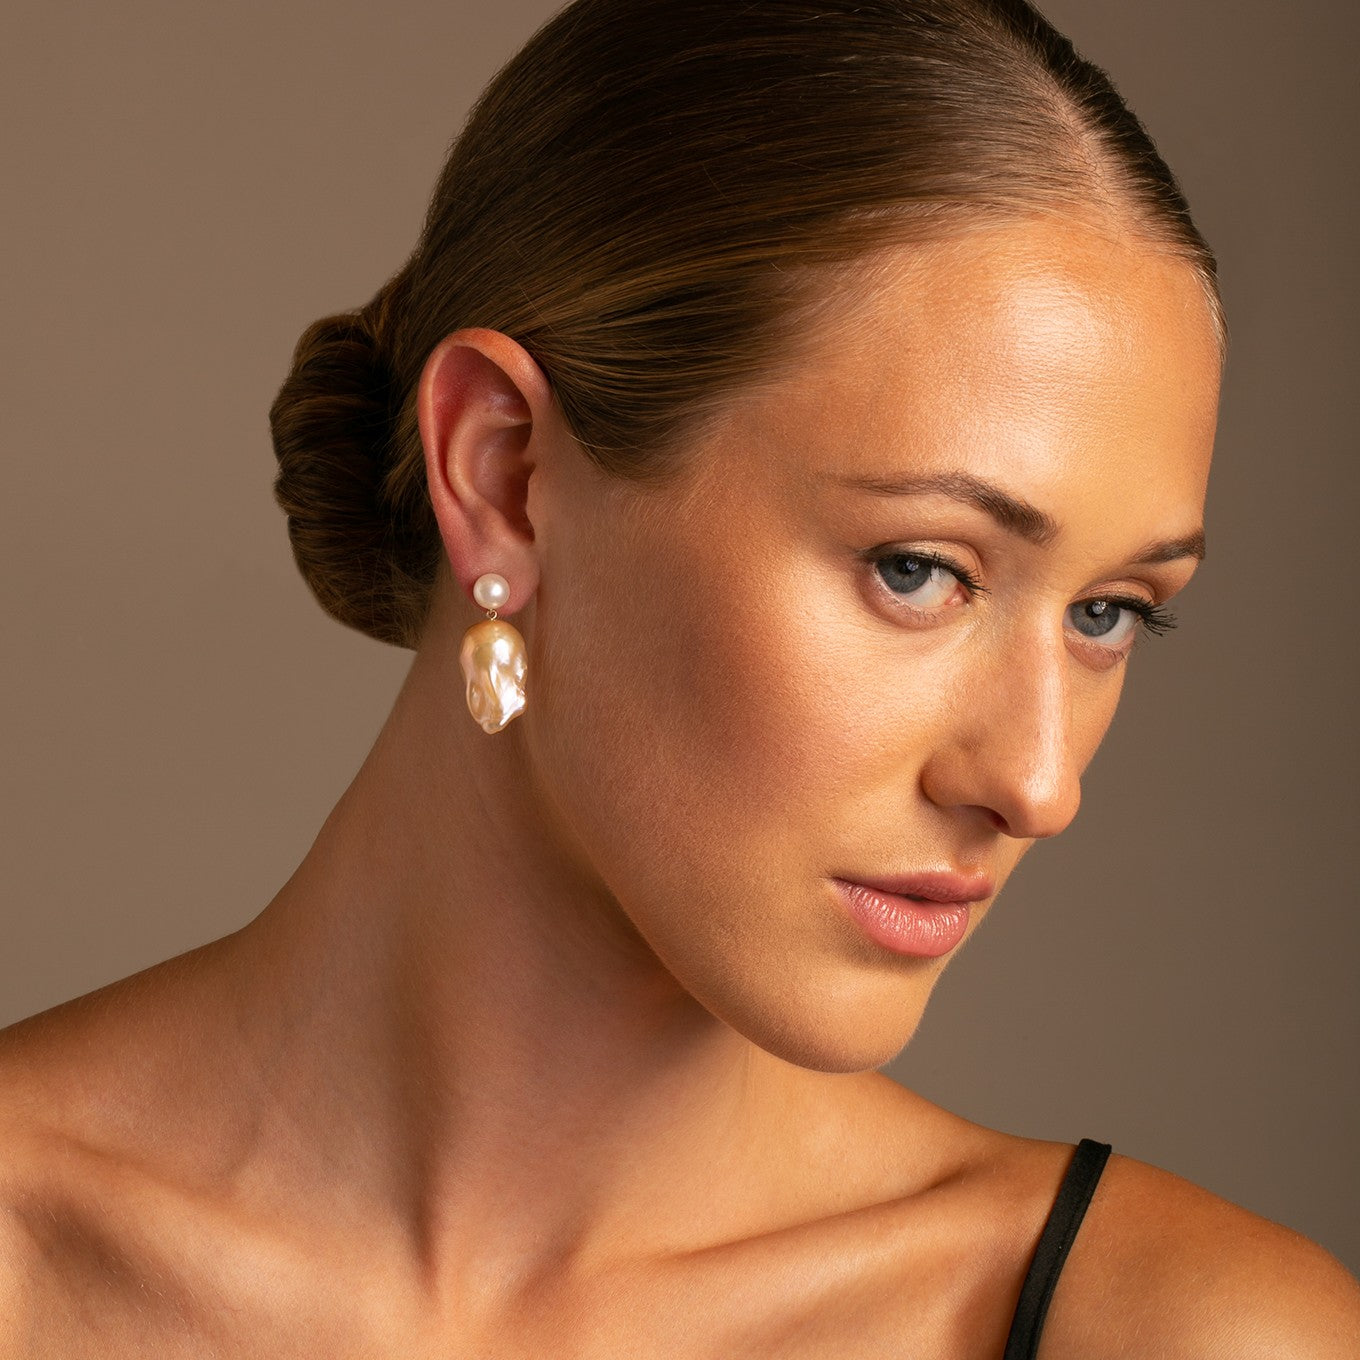 The Double Bubble earrings pair a classic 8-8.5 mm white freshwater pearl with a distinctive golden baroque pearl on a 14k yellow gold post on model